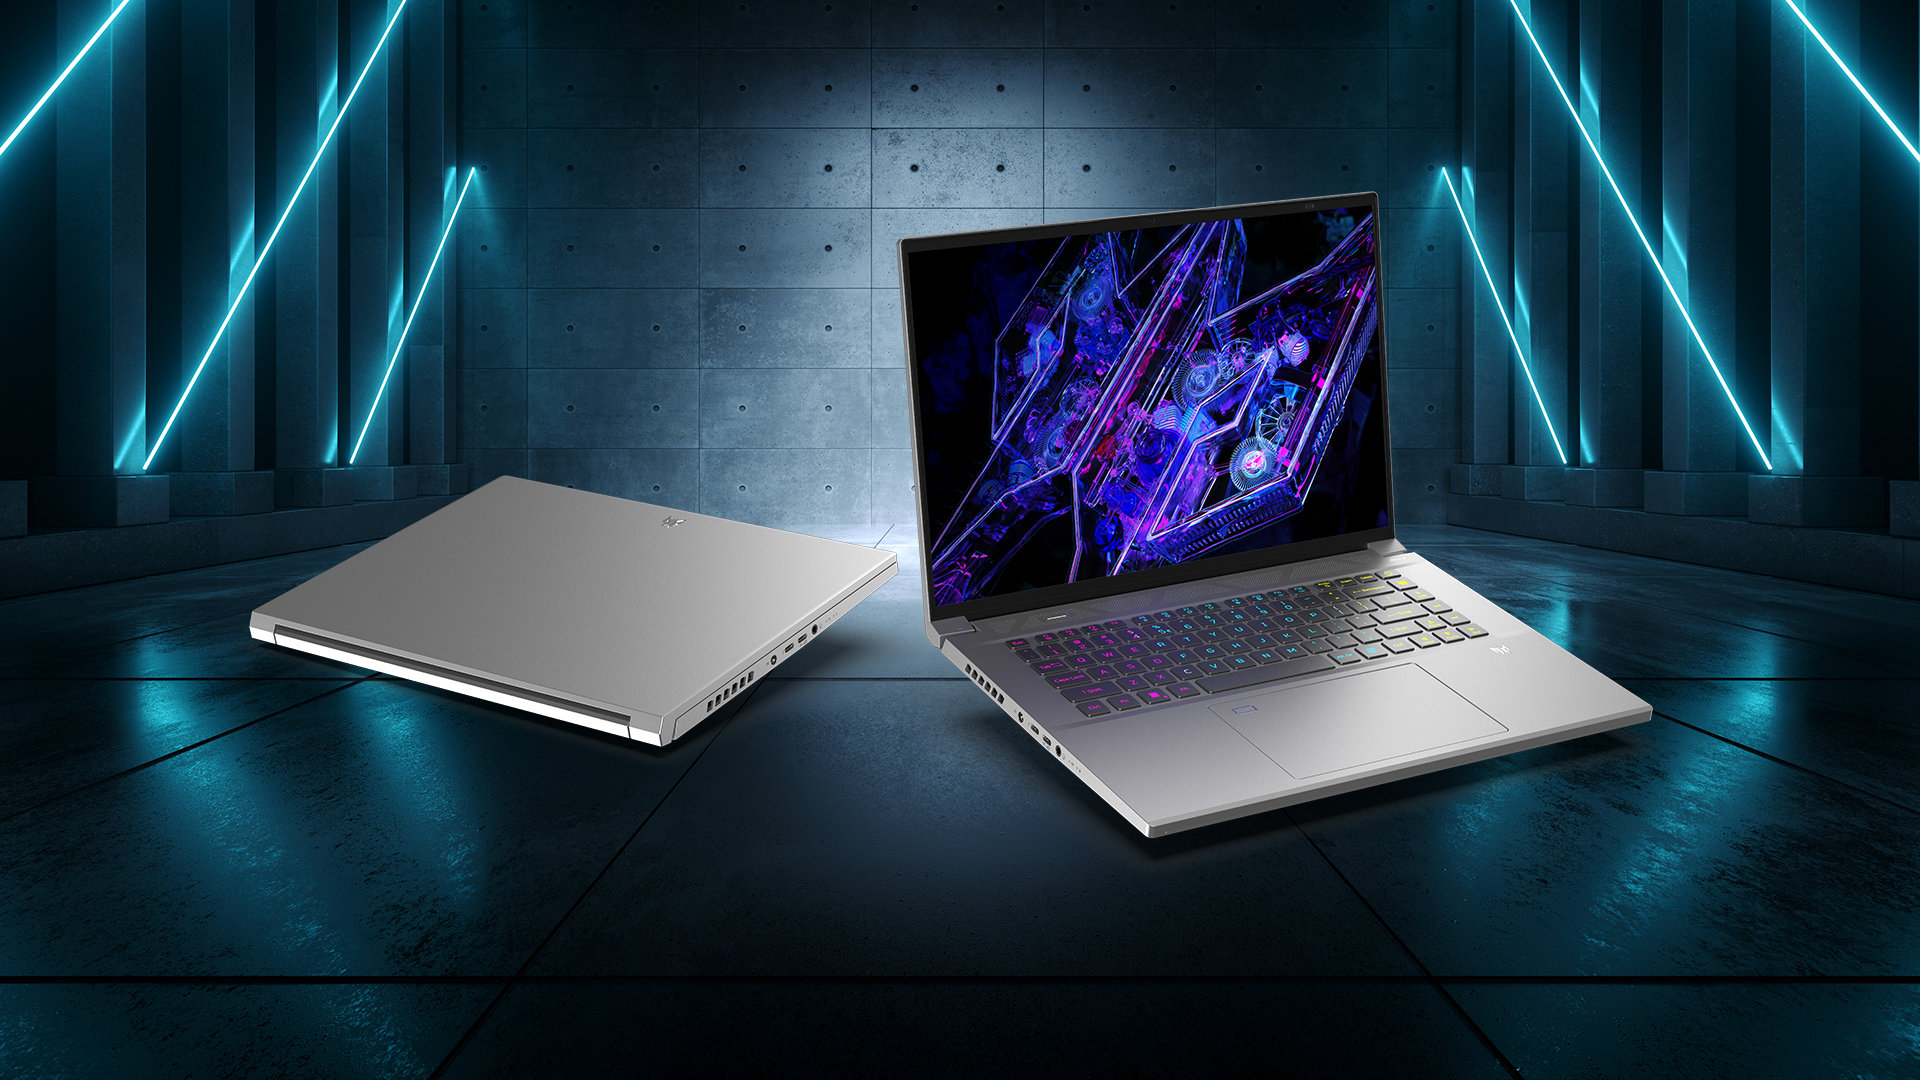 acer-unveils-its-latest-gaming-laptop-with-intel-core-ultra-cpus,-but-does-the-ai-driven-npu-make-a-real-difference?